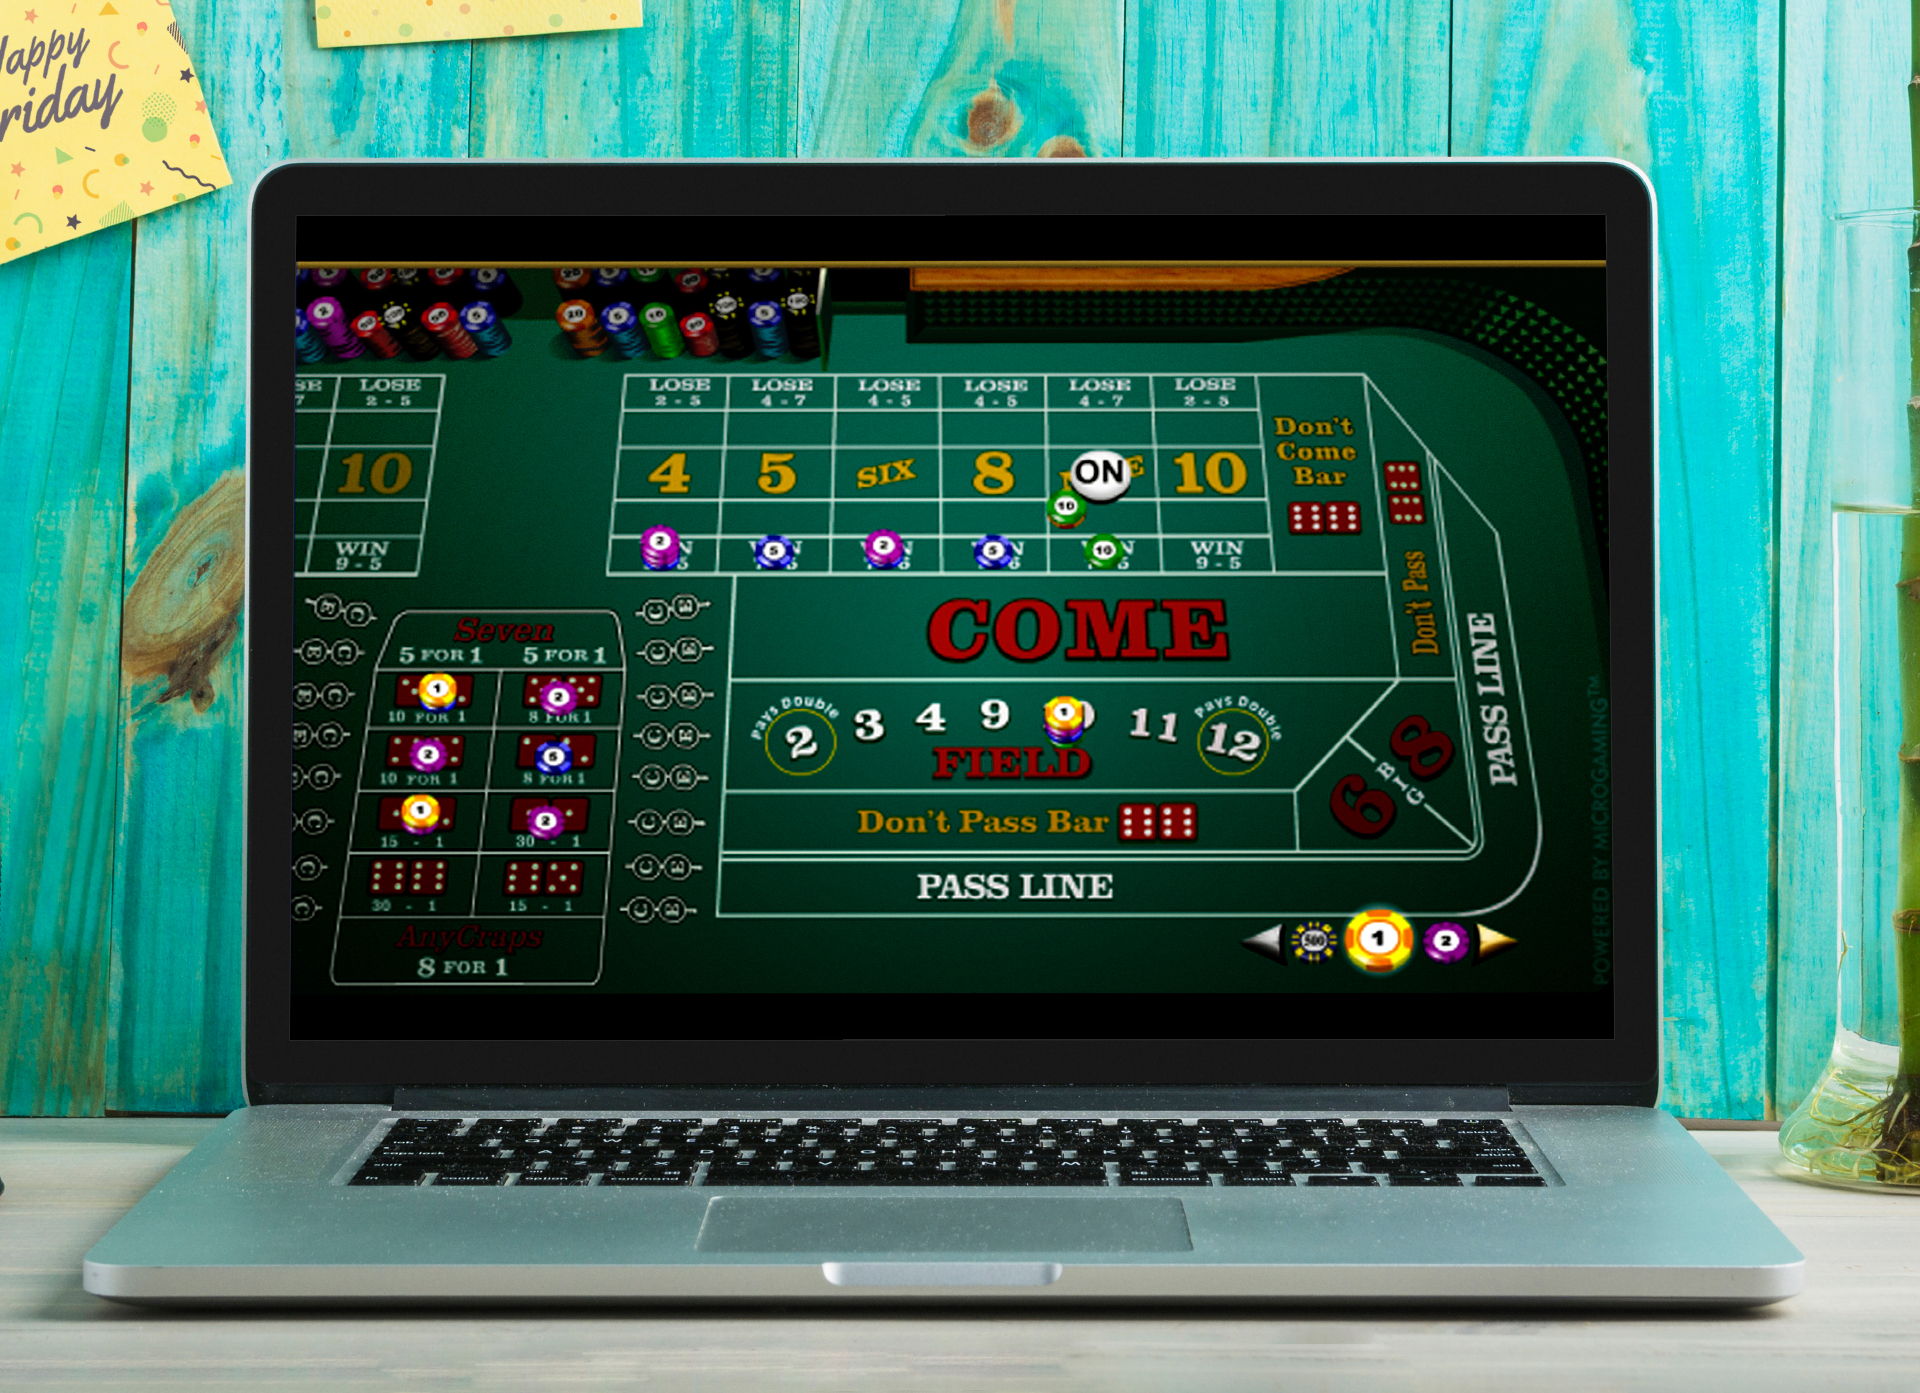 There are 2 types of Craps online casinos.